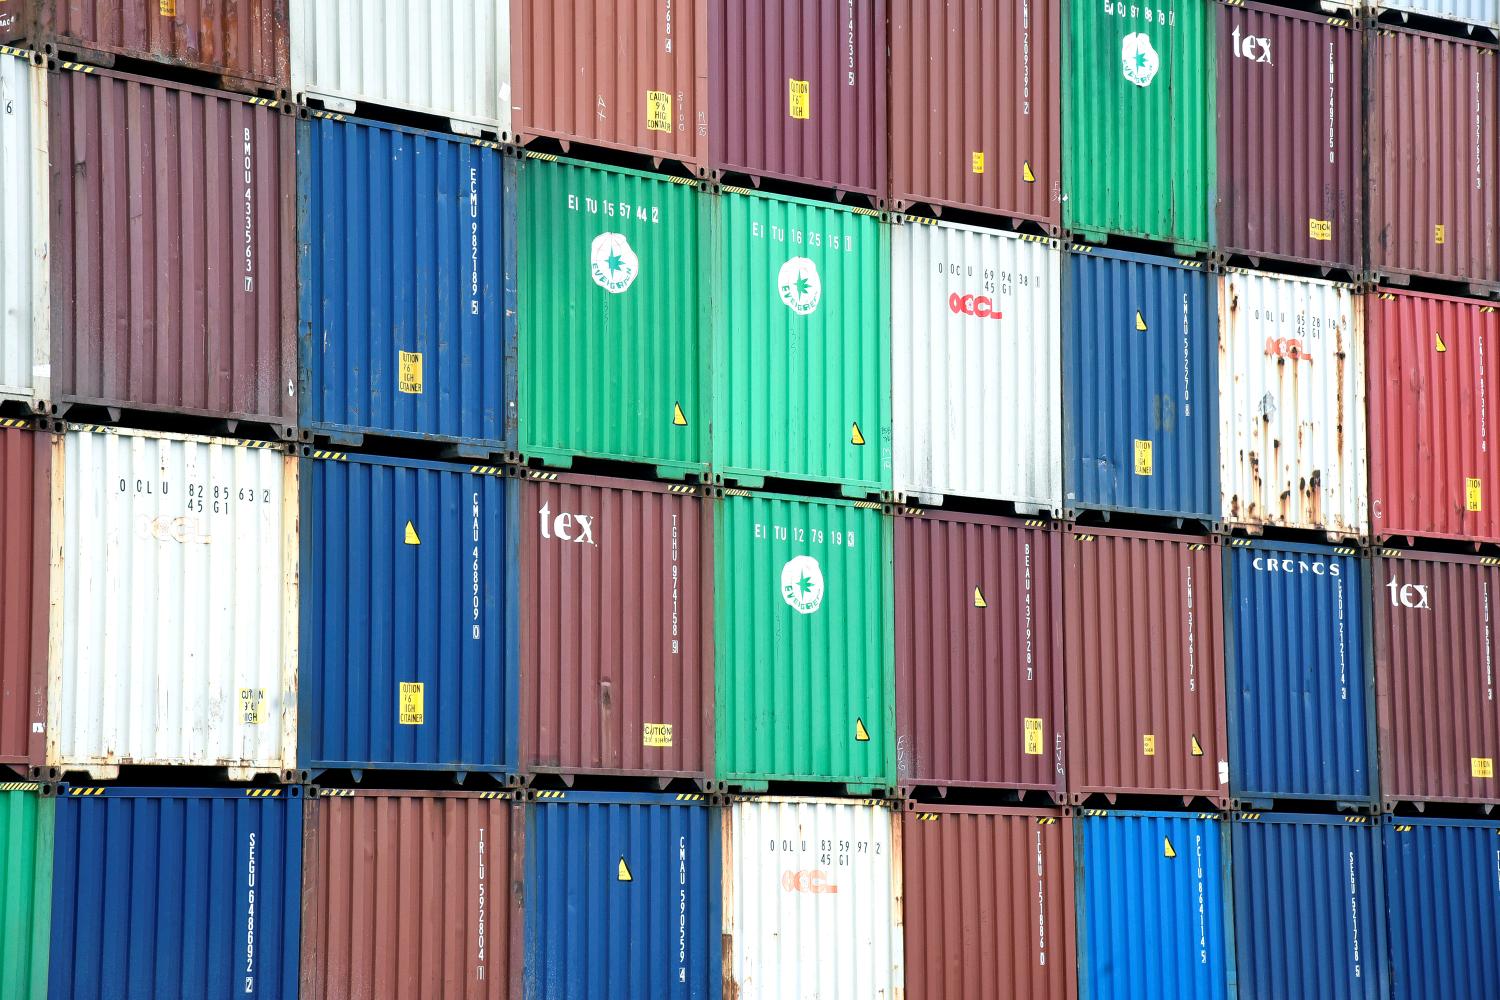 Shipping containers at Pier J at the Port of Long Beach wait for processing in Long Beach, California, U.S., April 4, 2018. REUTERS/Bob Riha Jr. - RC115A3409A0